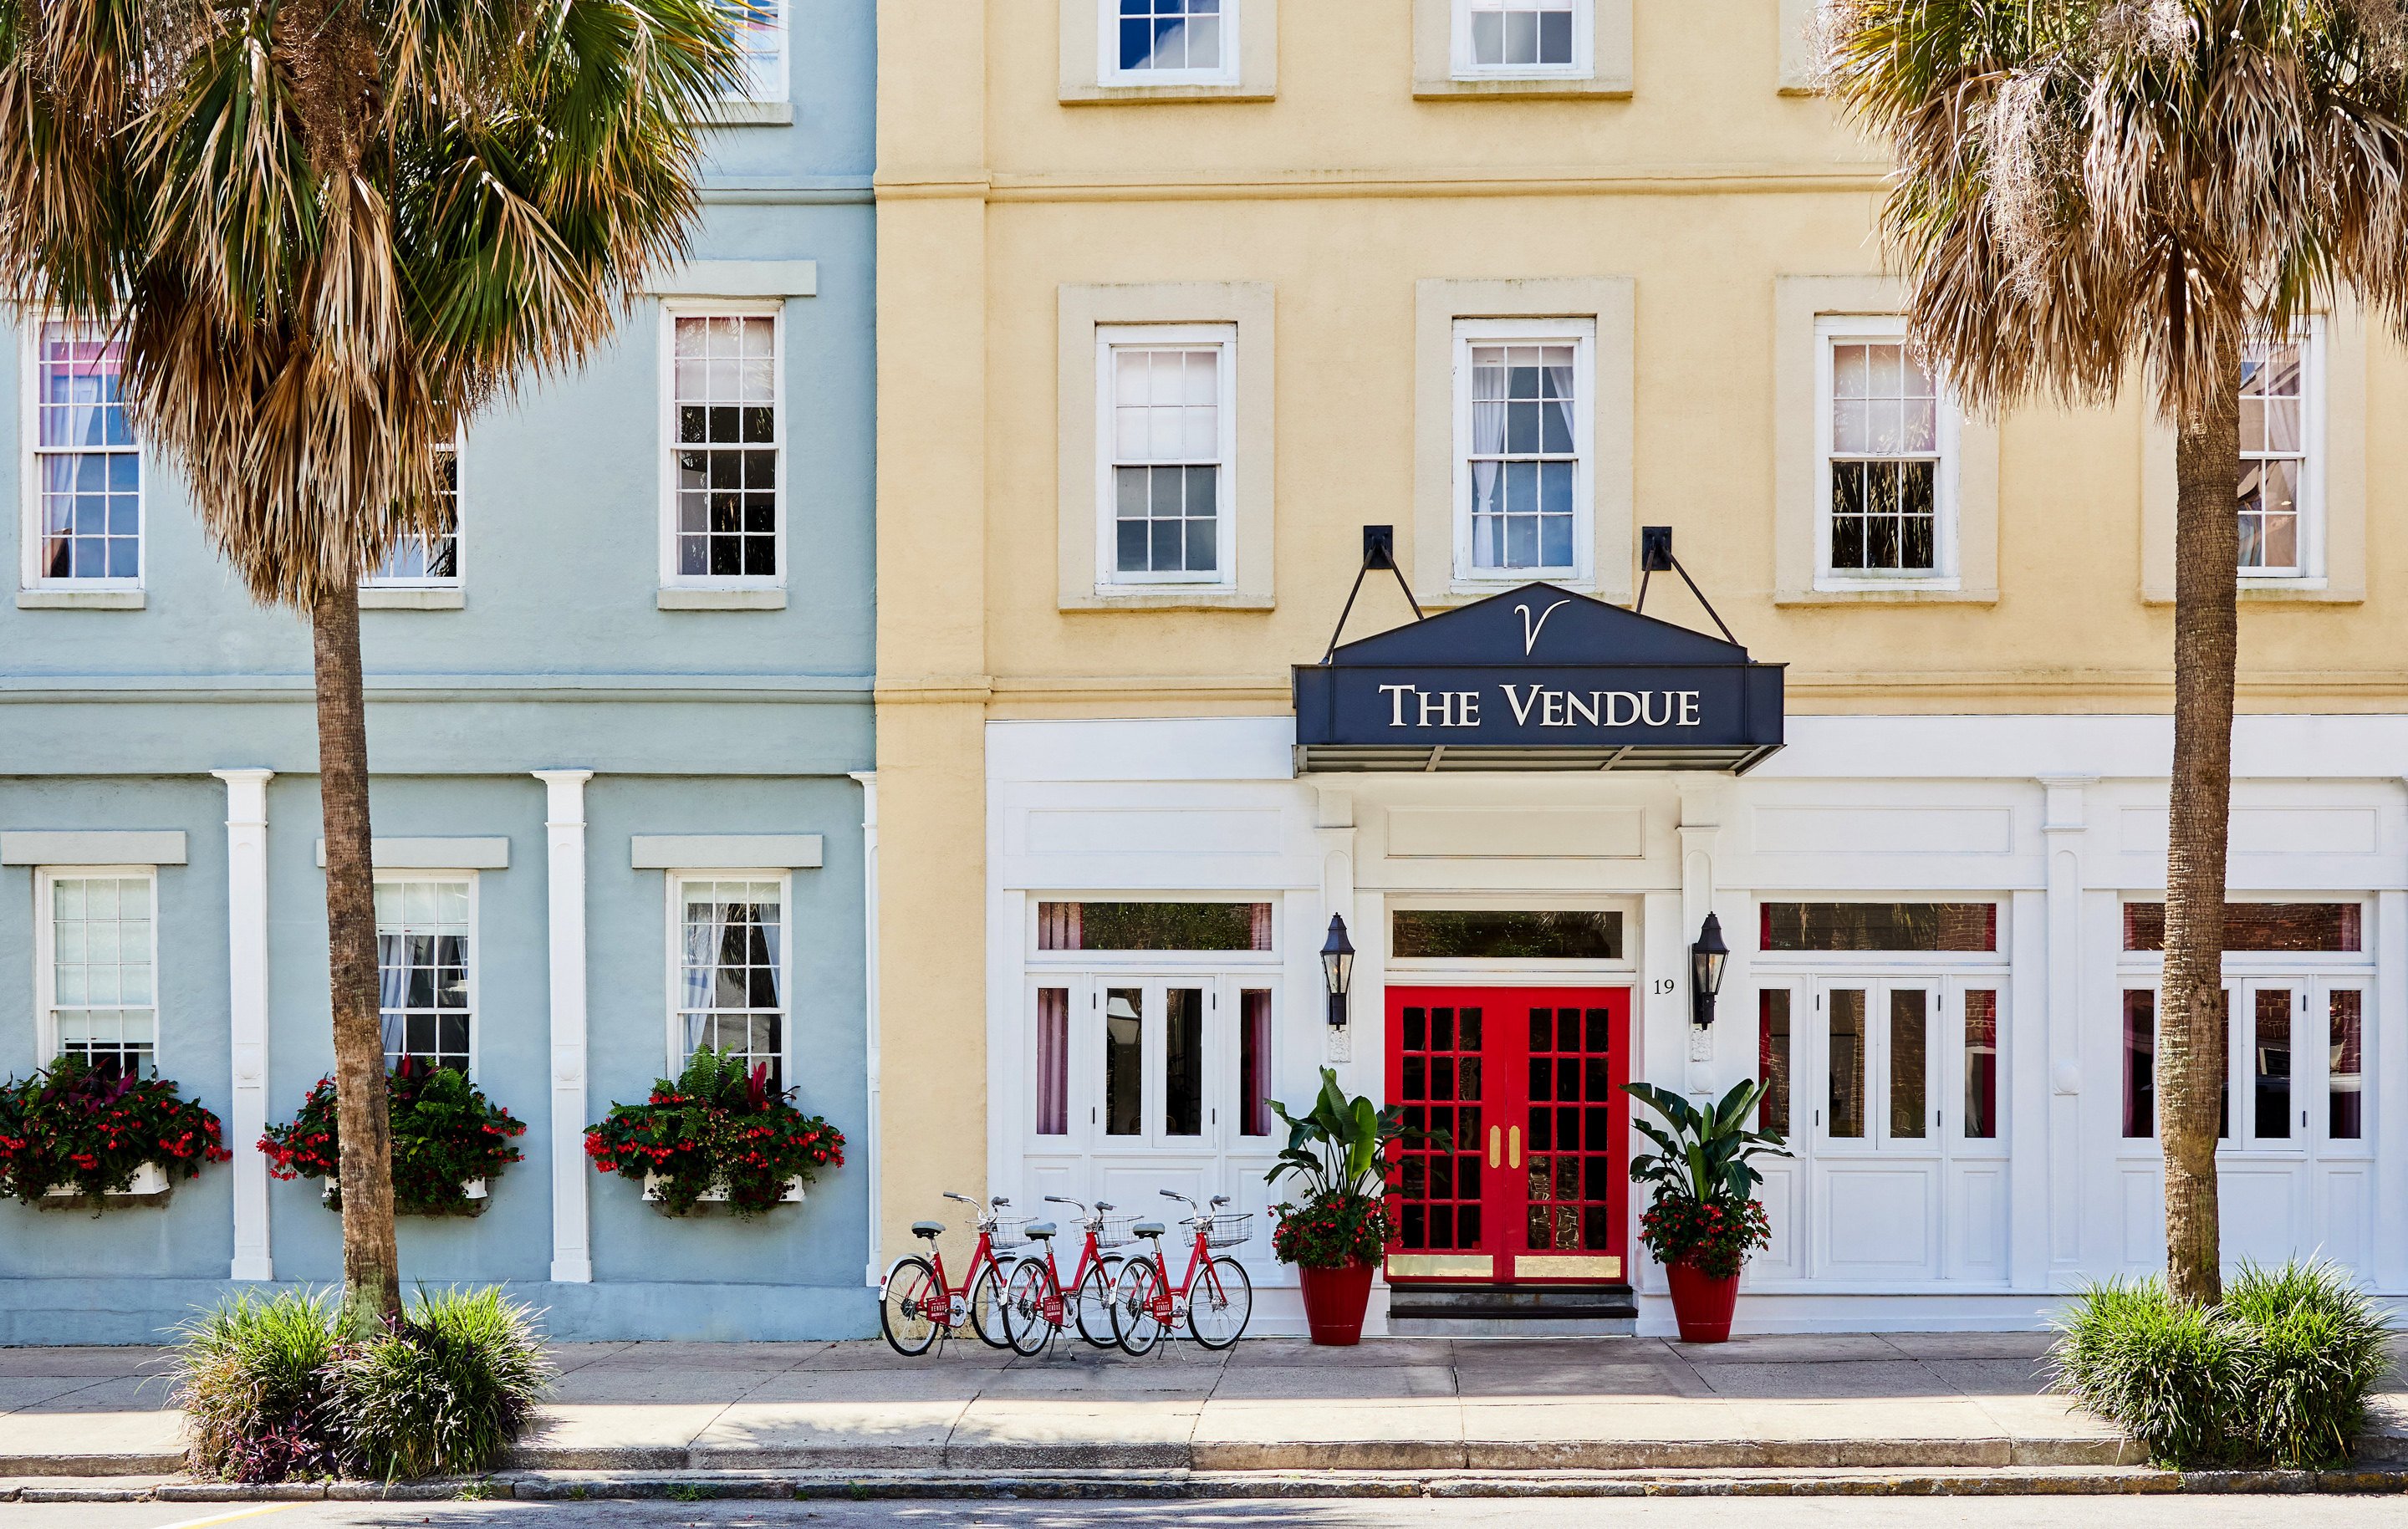 The Vendue, an art hotel sited in two historic buildings in Charleston, South Carolina, US. Photo: Handout